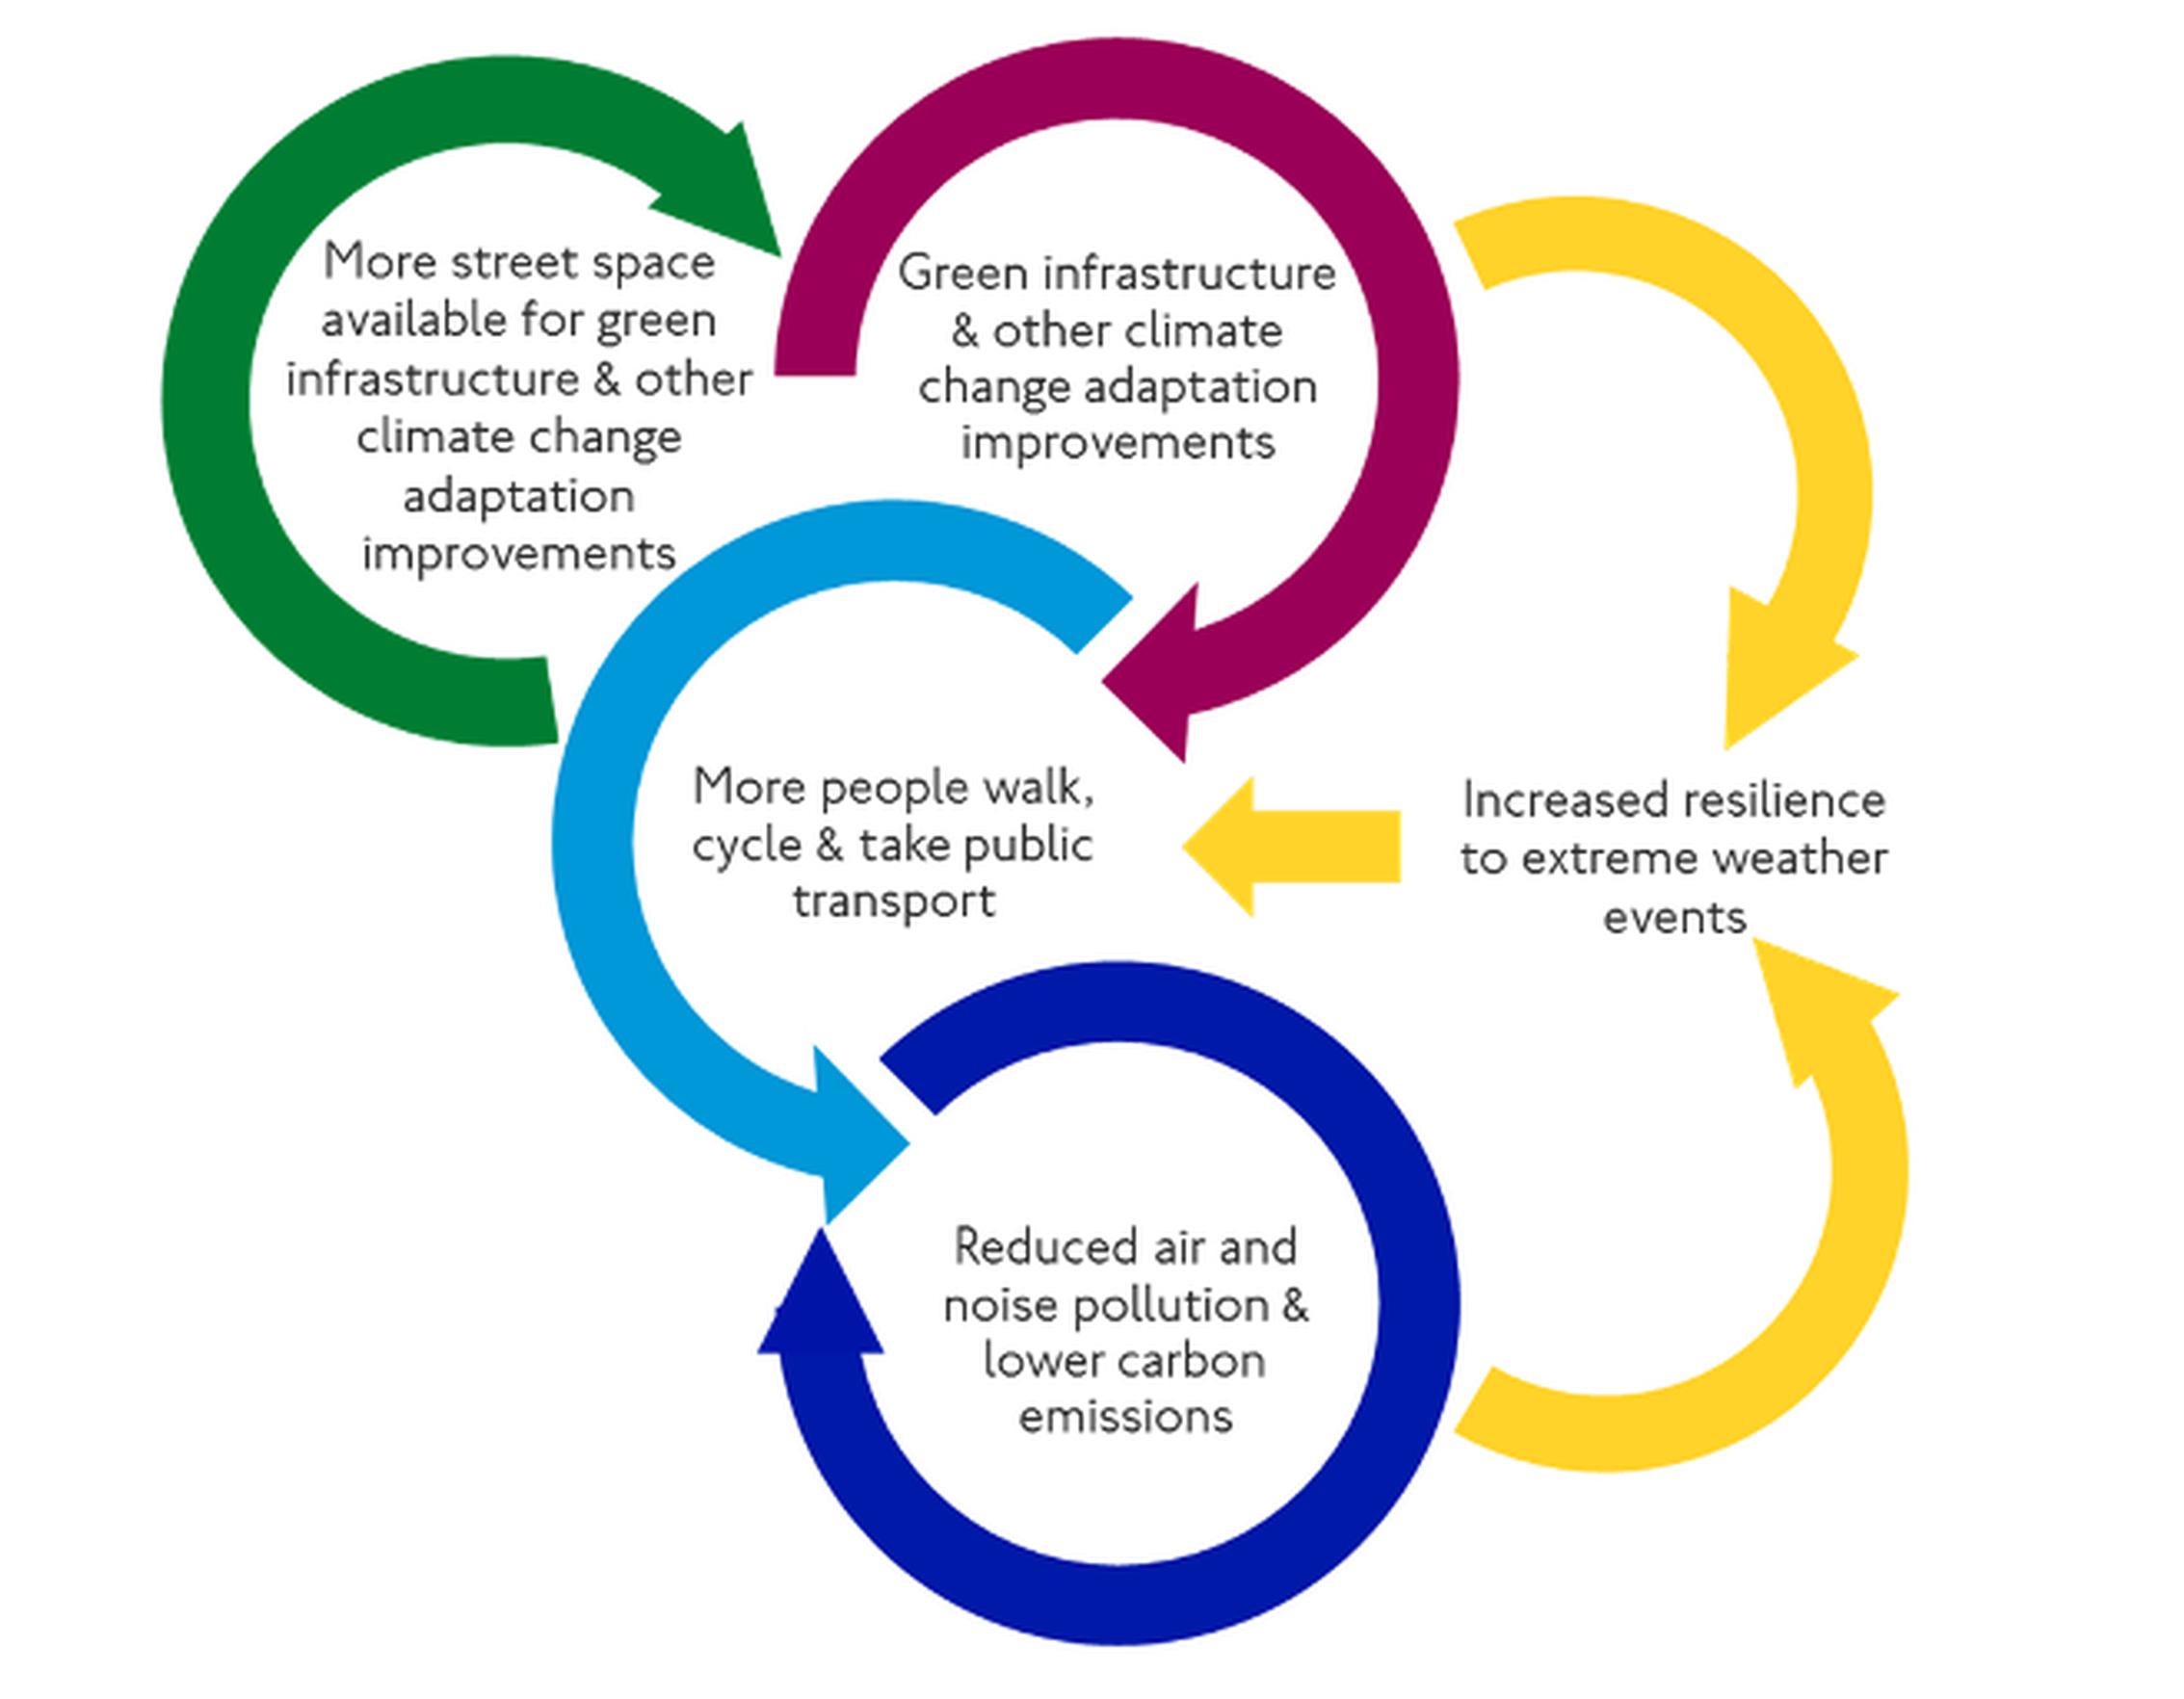 Example of how connected climate change adaptation is with resilience and a small selection of other environmental policy imperatives